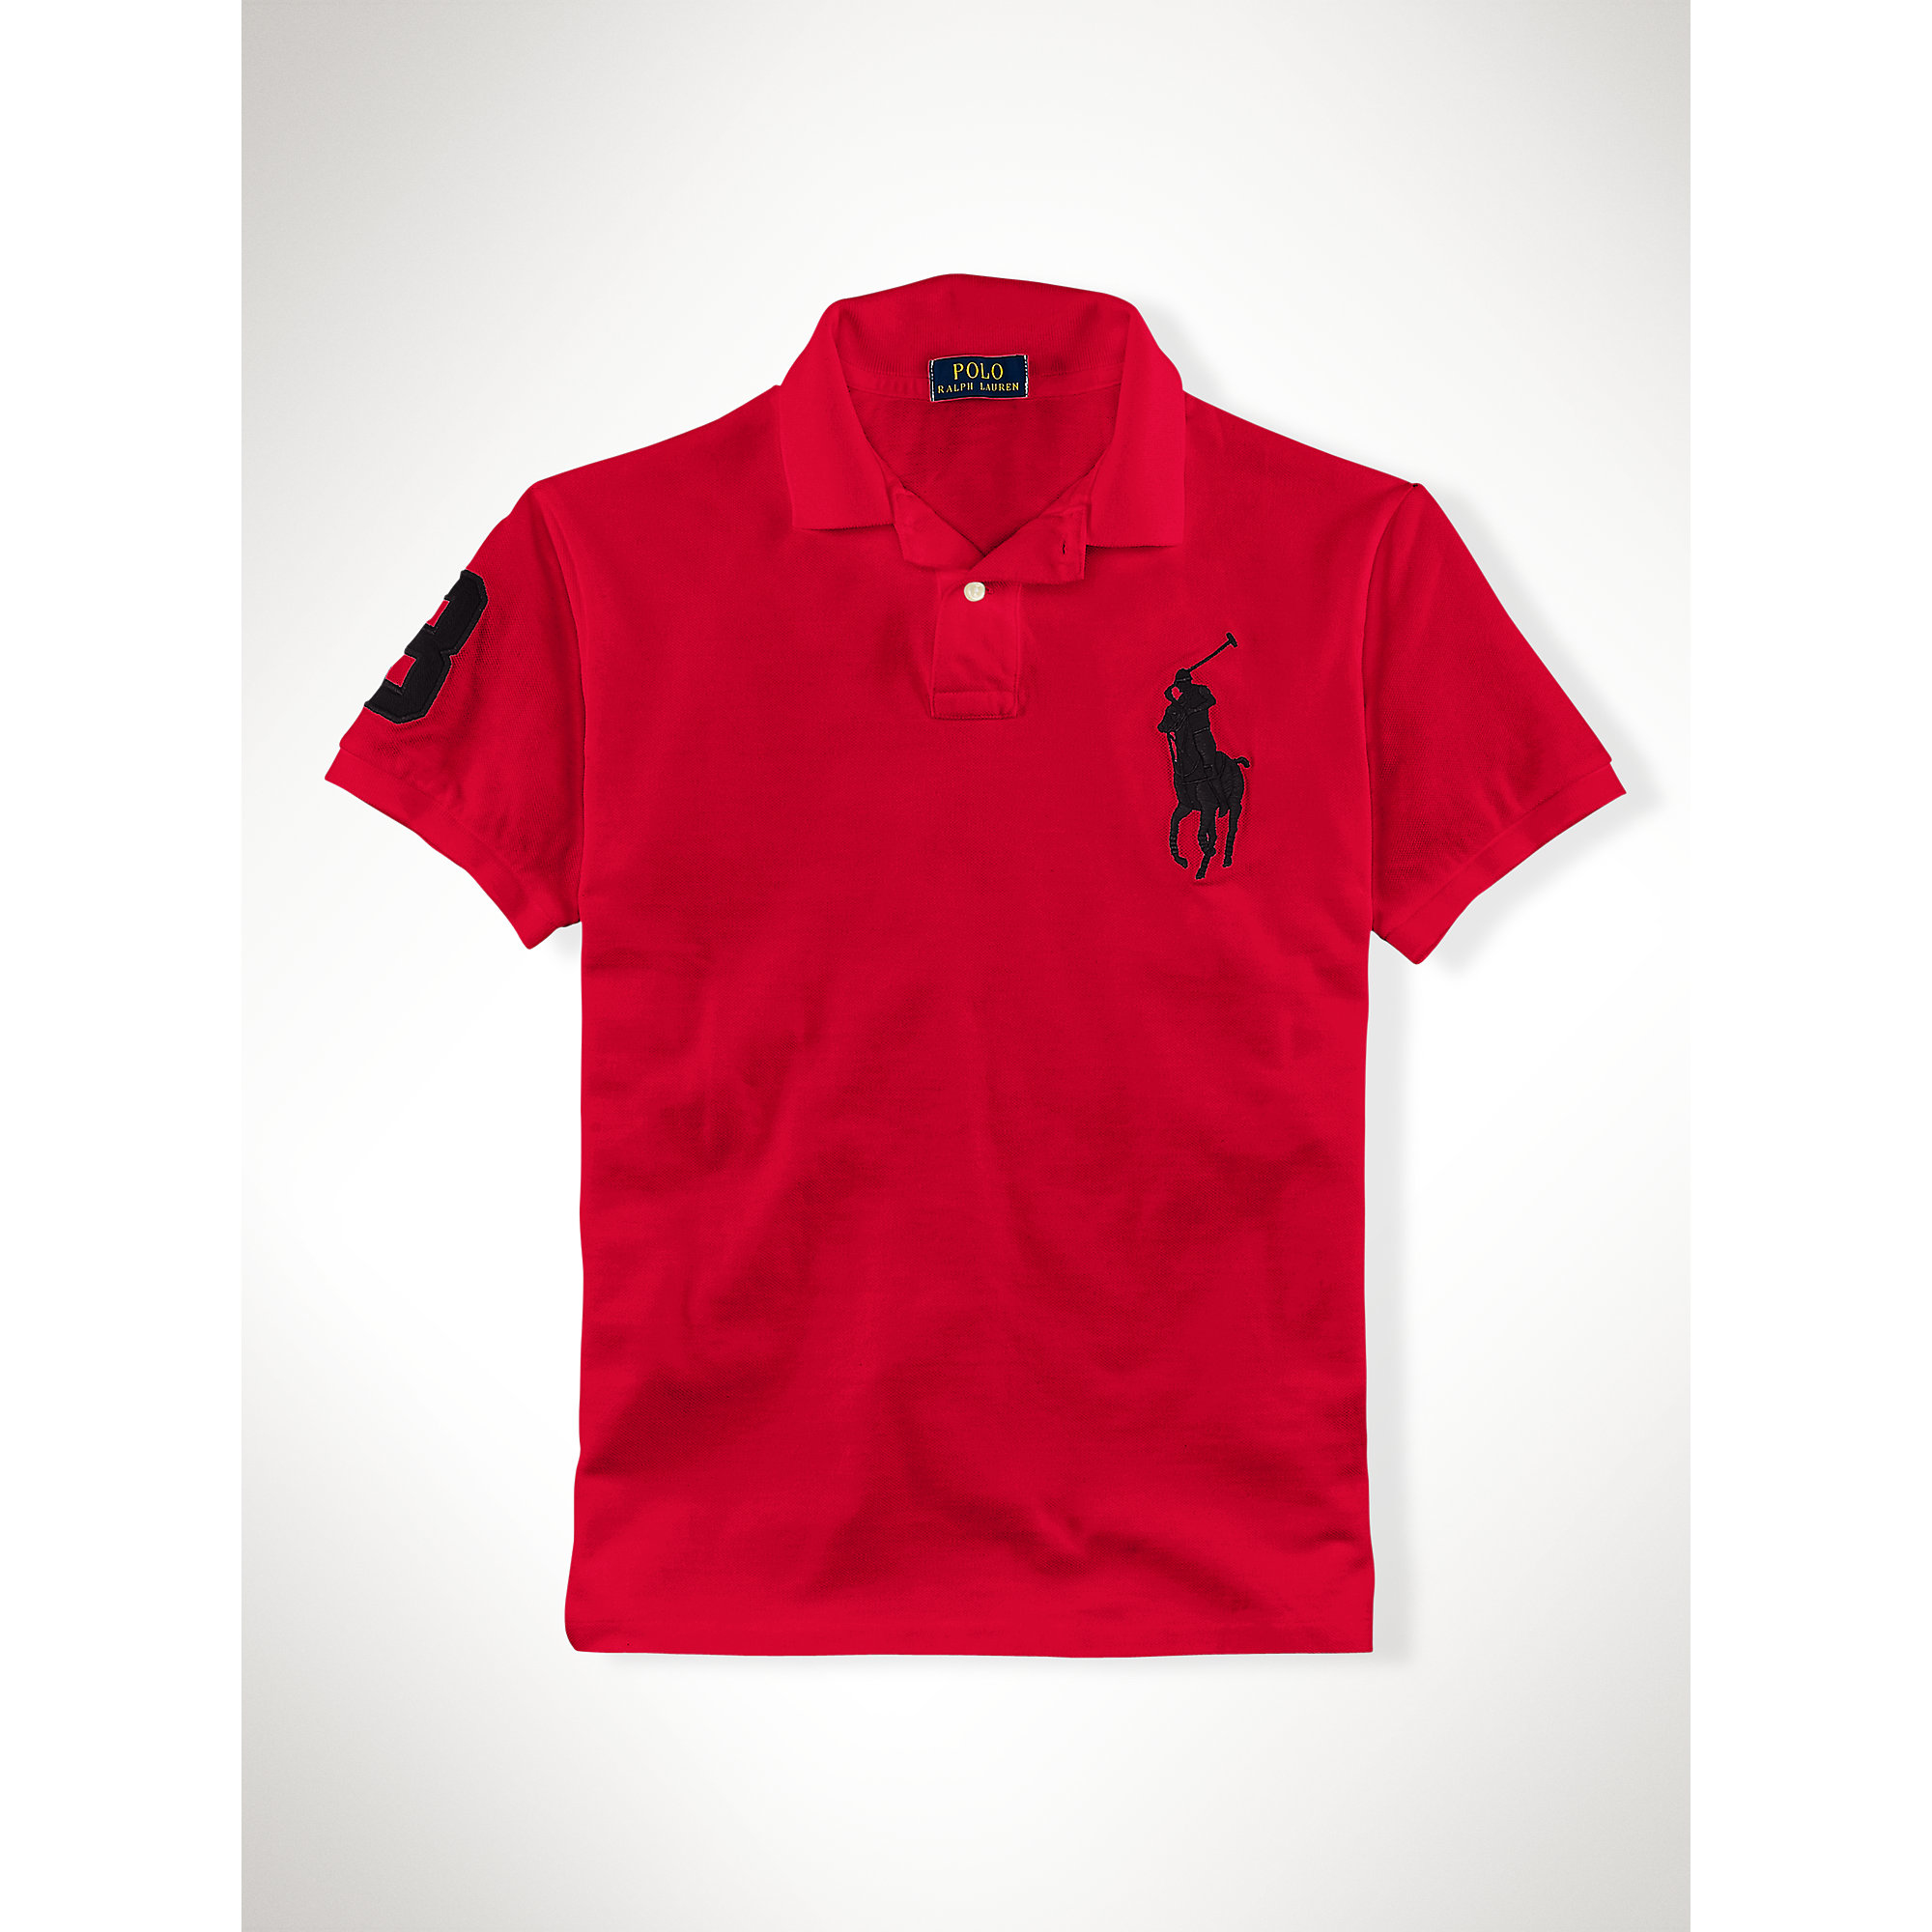 Lyst - Polo Ralph Lauren Slim-fit Big Pony Polo in Black for Men